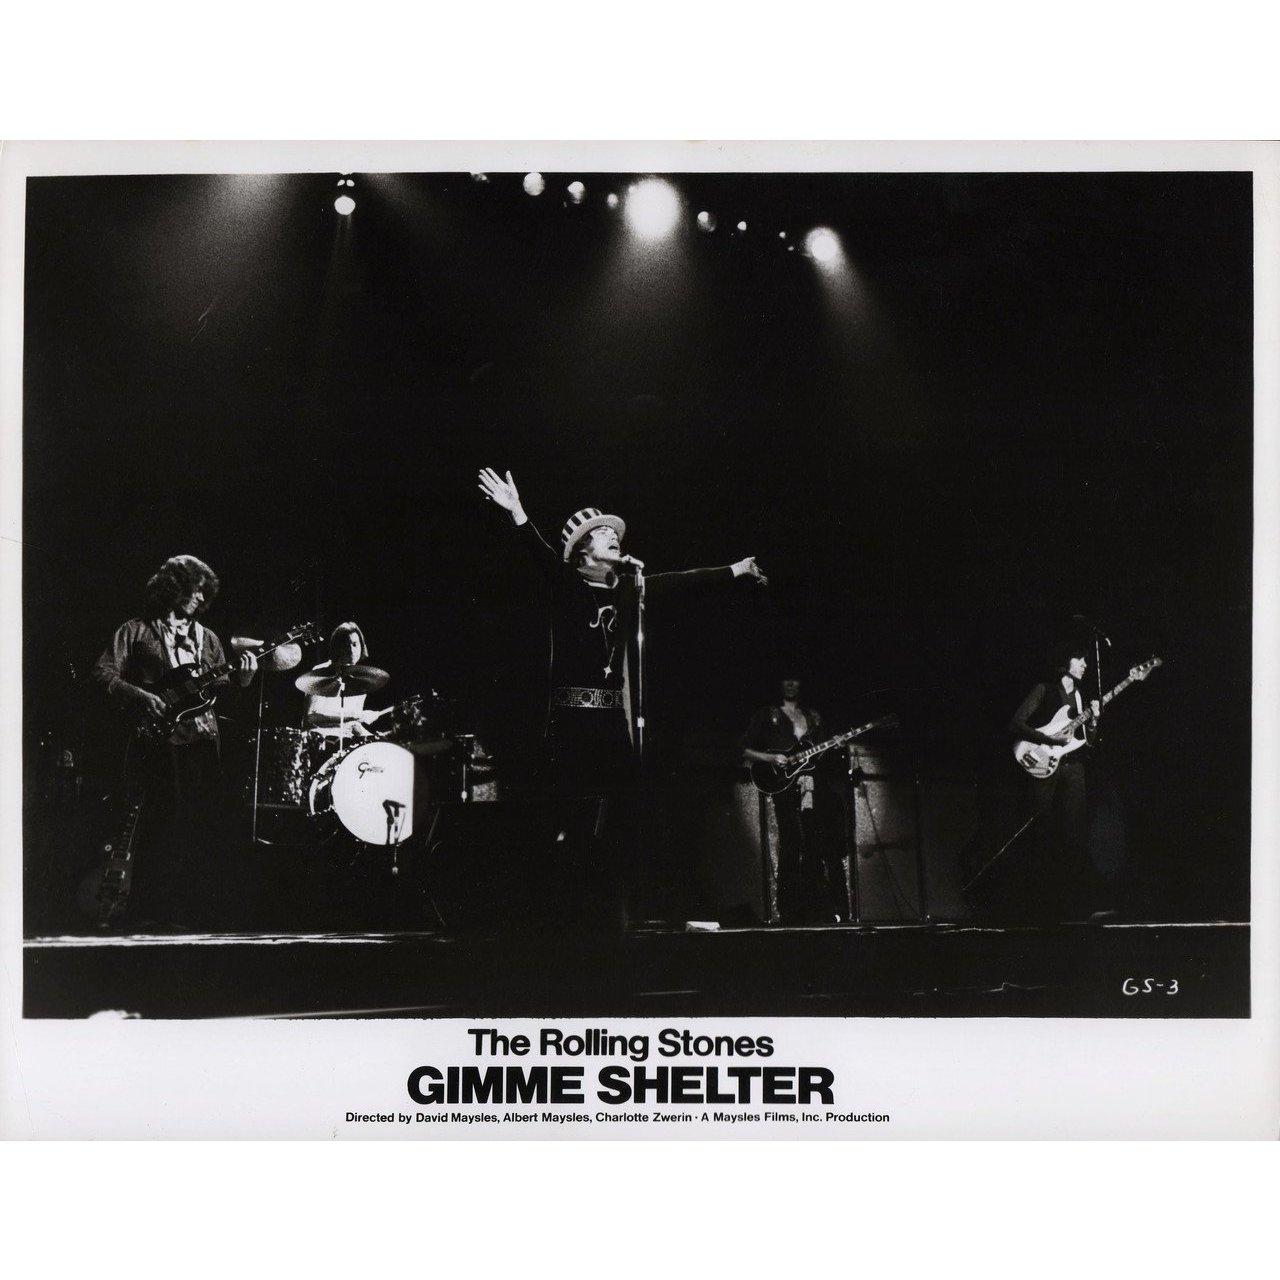 American Gimme Shelter 1971 U.S. Silver Gelatin Single-Weight Photo